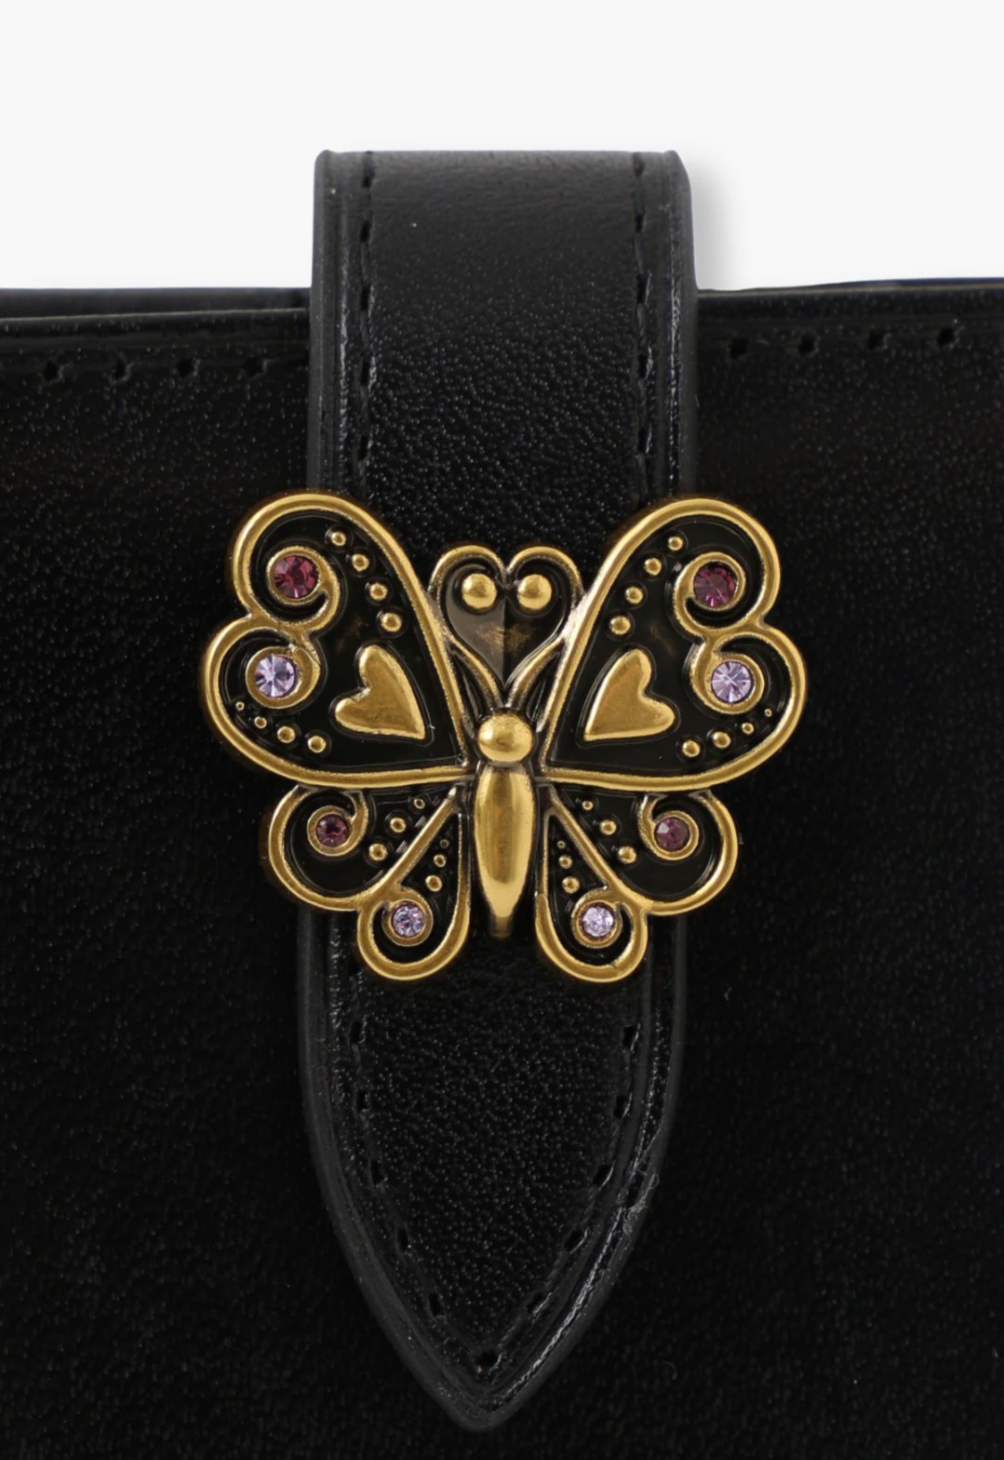 The Roger Wallet detail of signature Anna Sui golden butterfly hardware on the flap of the wallet